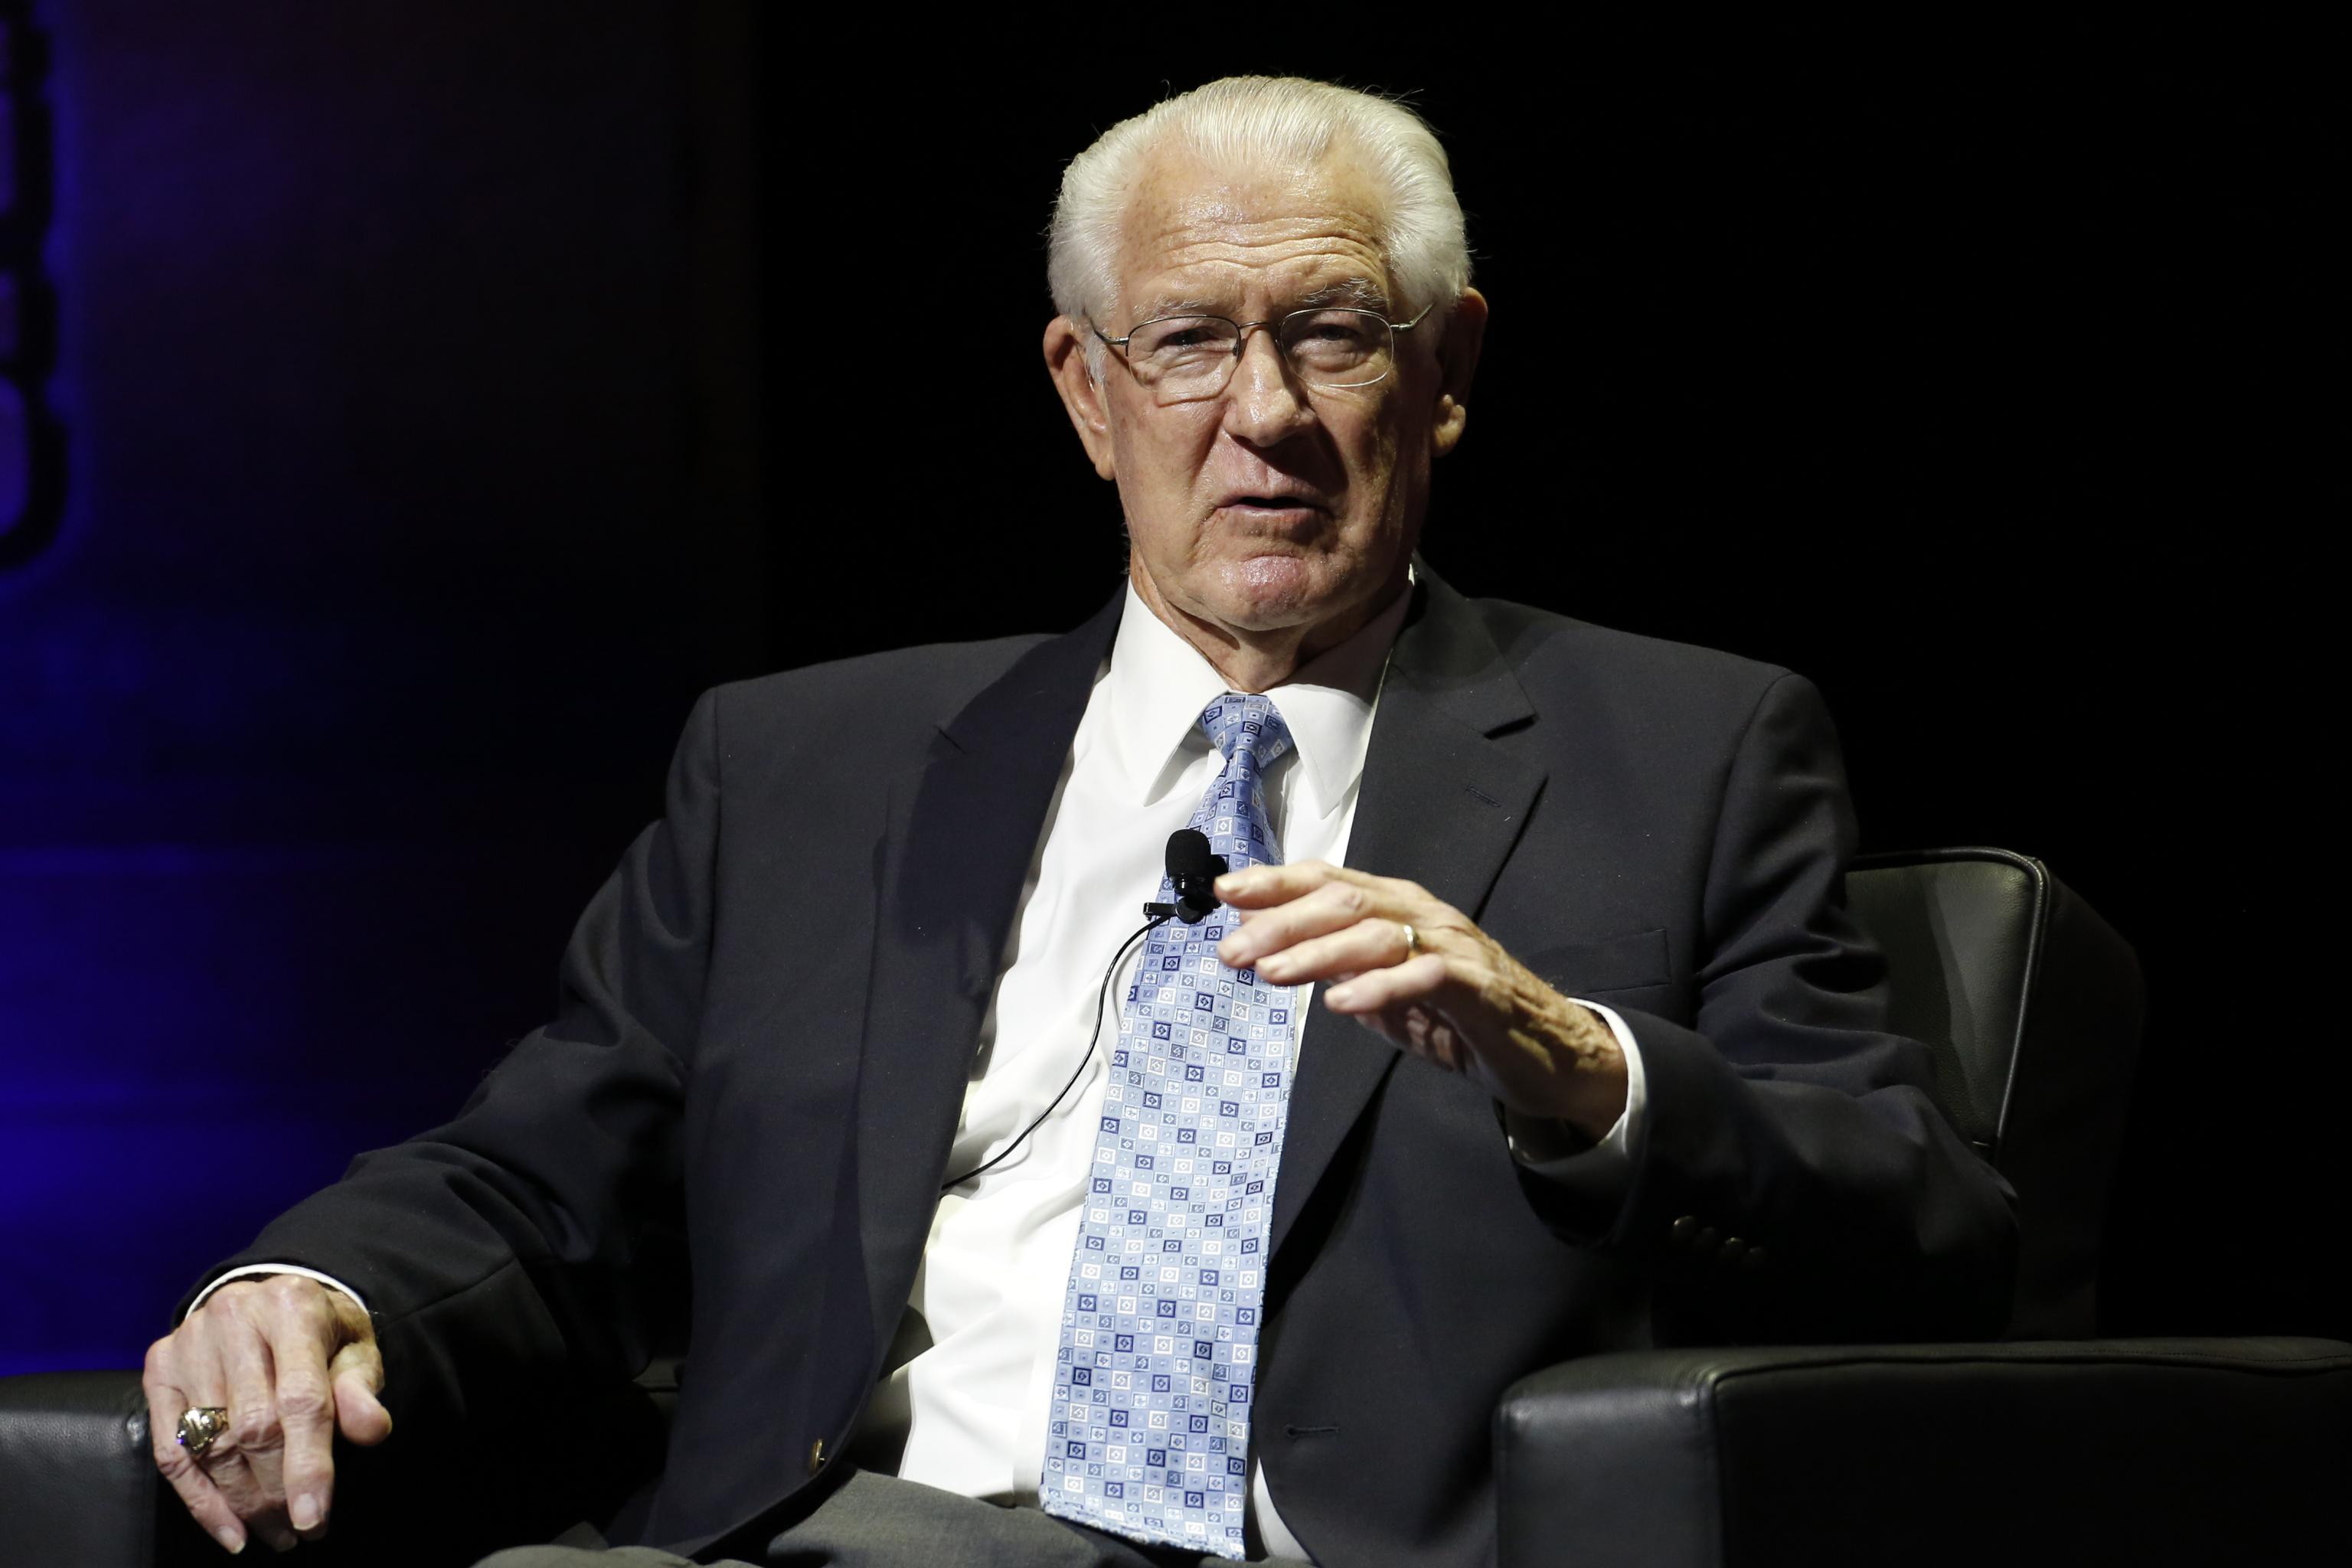 John Havlicek, Celtics great with mighty steal, dies at 79